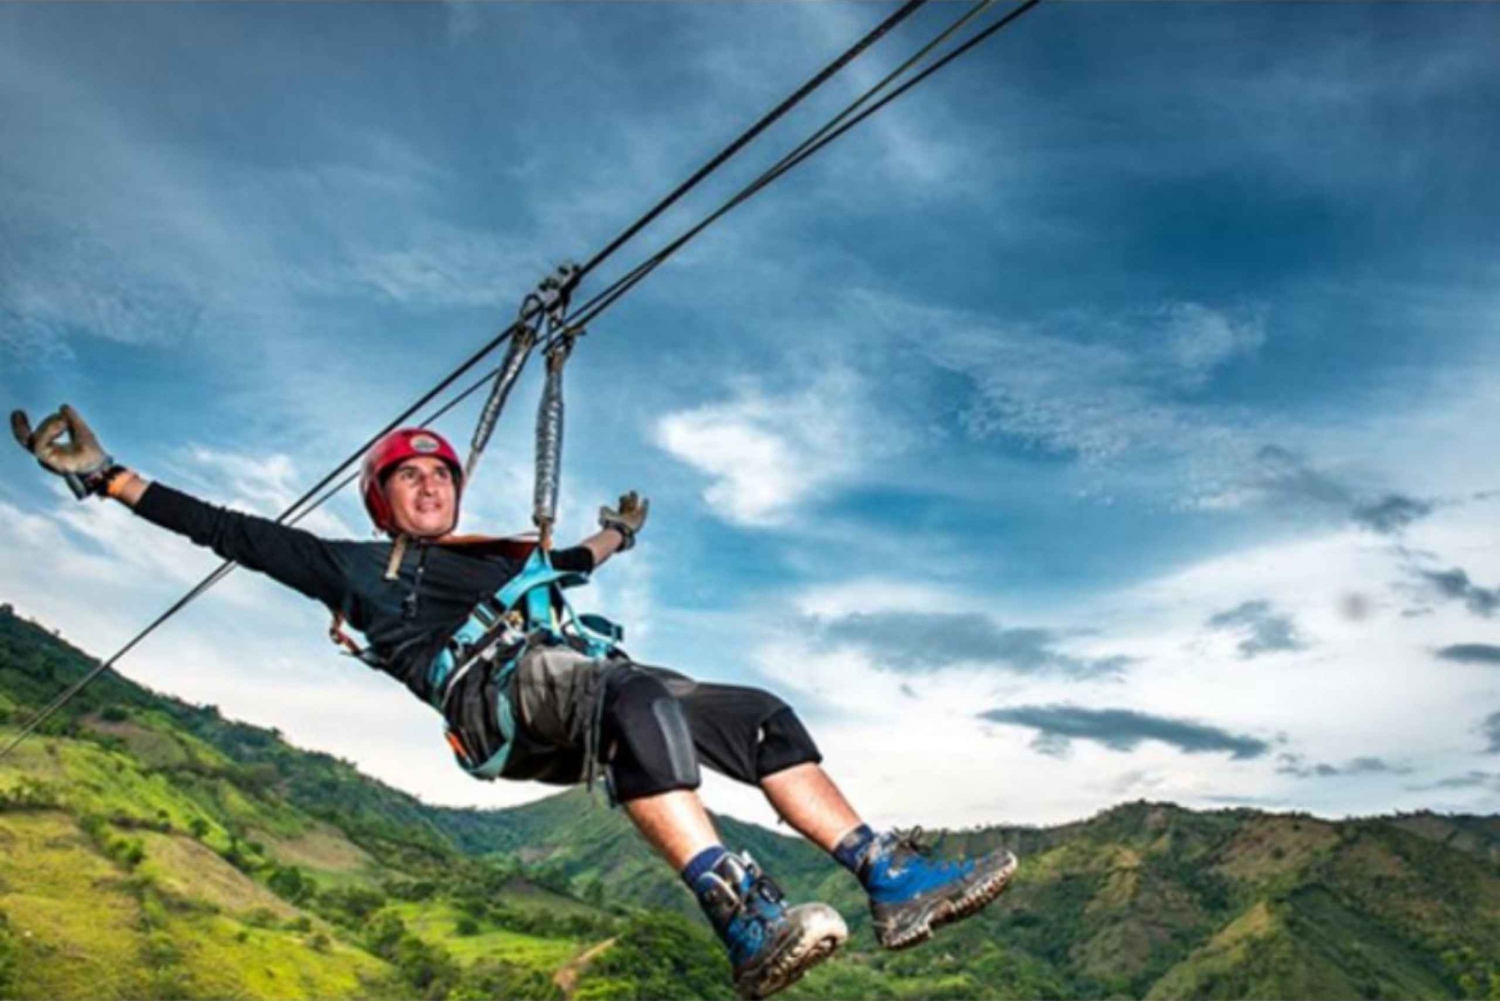 From Bogotá: Trip to Colombia's Highest Zip Line in Tobia